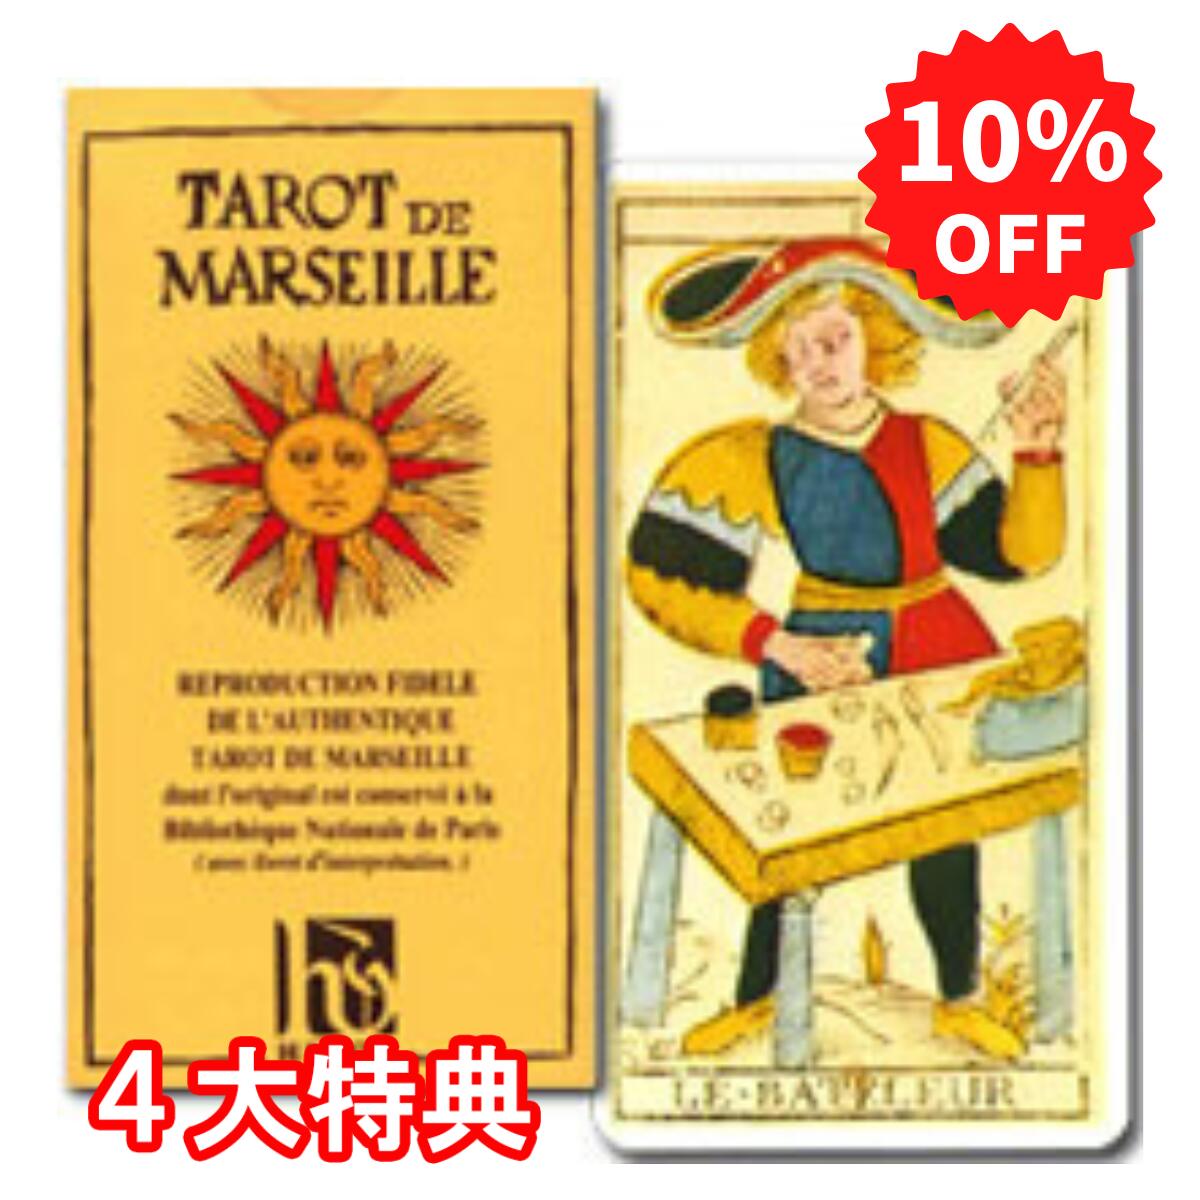 【SALE】【<strong>タロット</strong>カード】ニコラ・コンヴェル版　<strong>タロット</strong>・デ・<strong>マルセイユ</strong>☆TAROT DE MARSEILLE